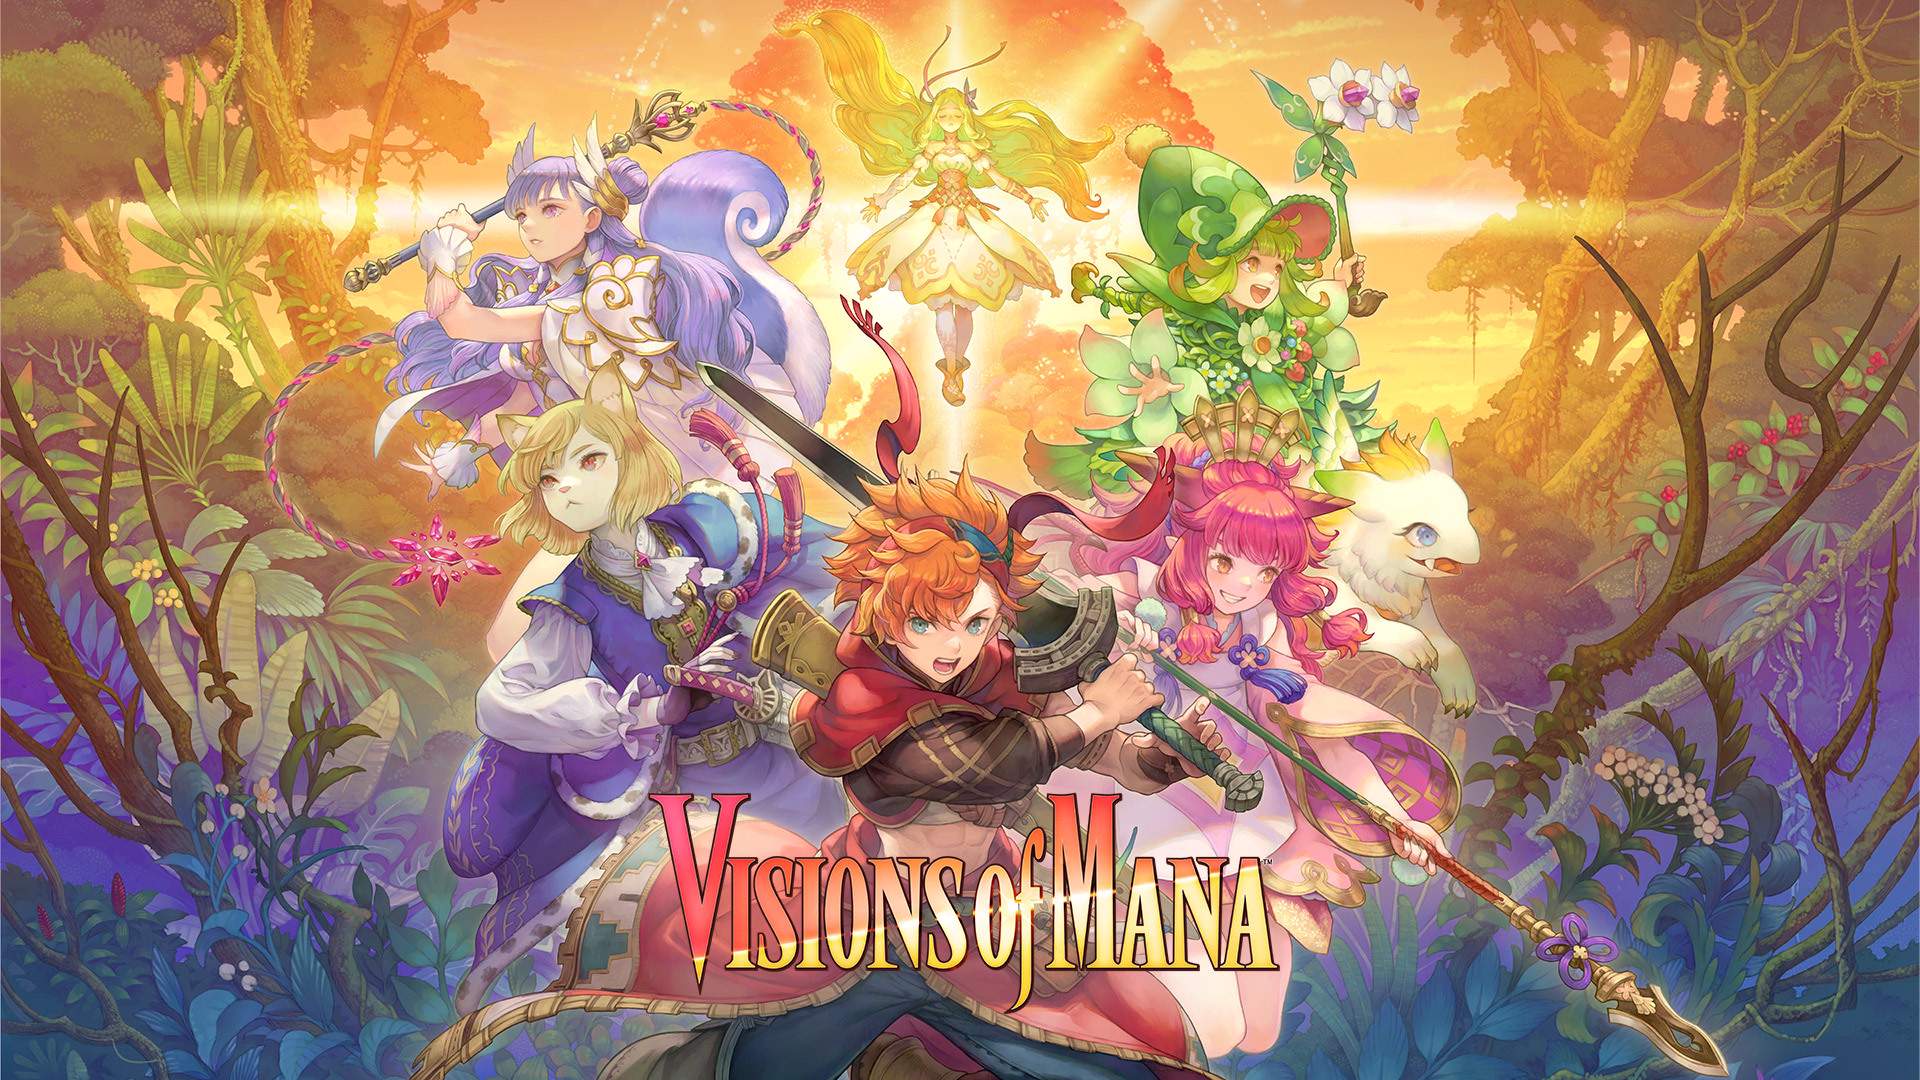 Visions of Mana beautyshot showing pre order, digital deluxe and Collector’s edition offerings